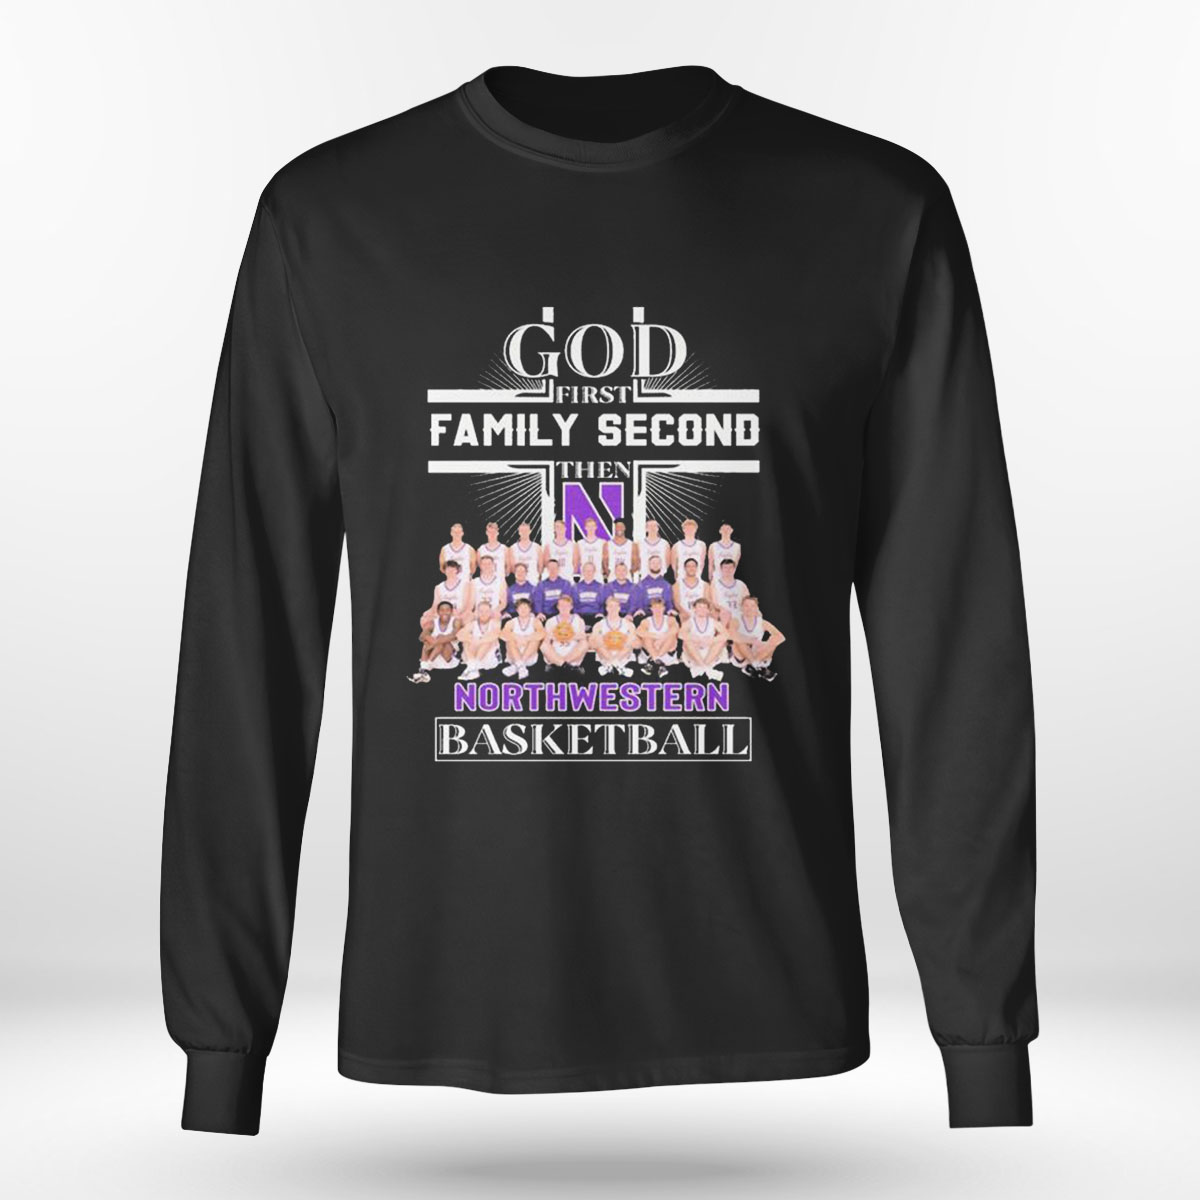 God First Family Second Then Team Northwestern Basketball T-shirt